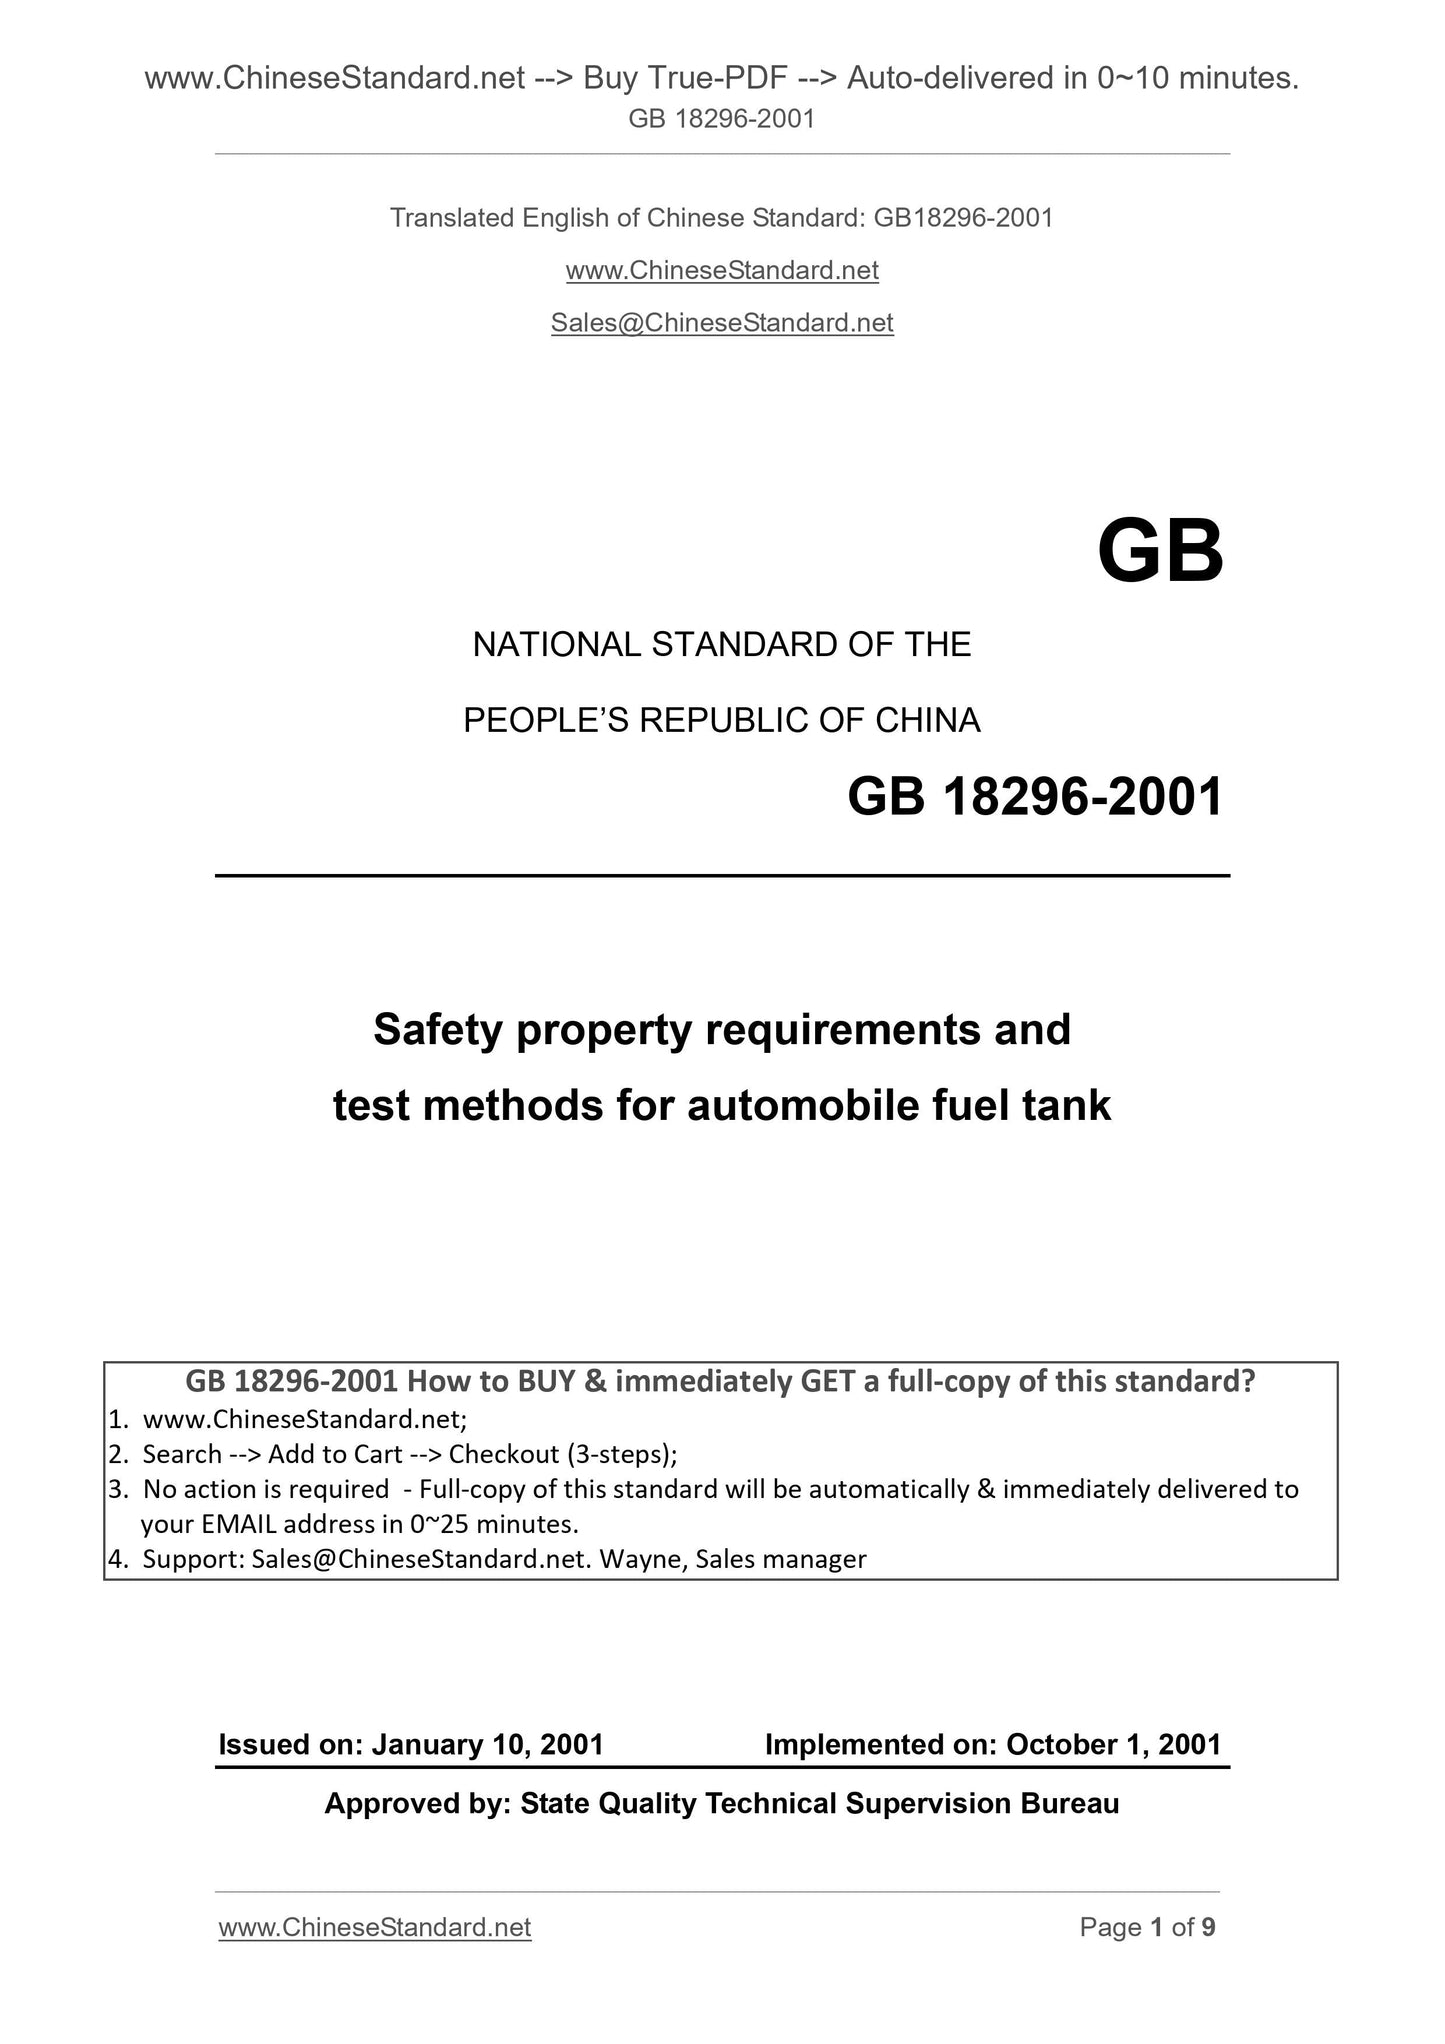 GB 18296-2001 Page 1